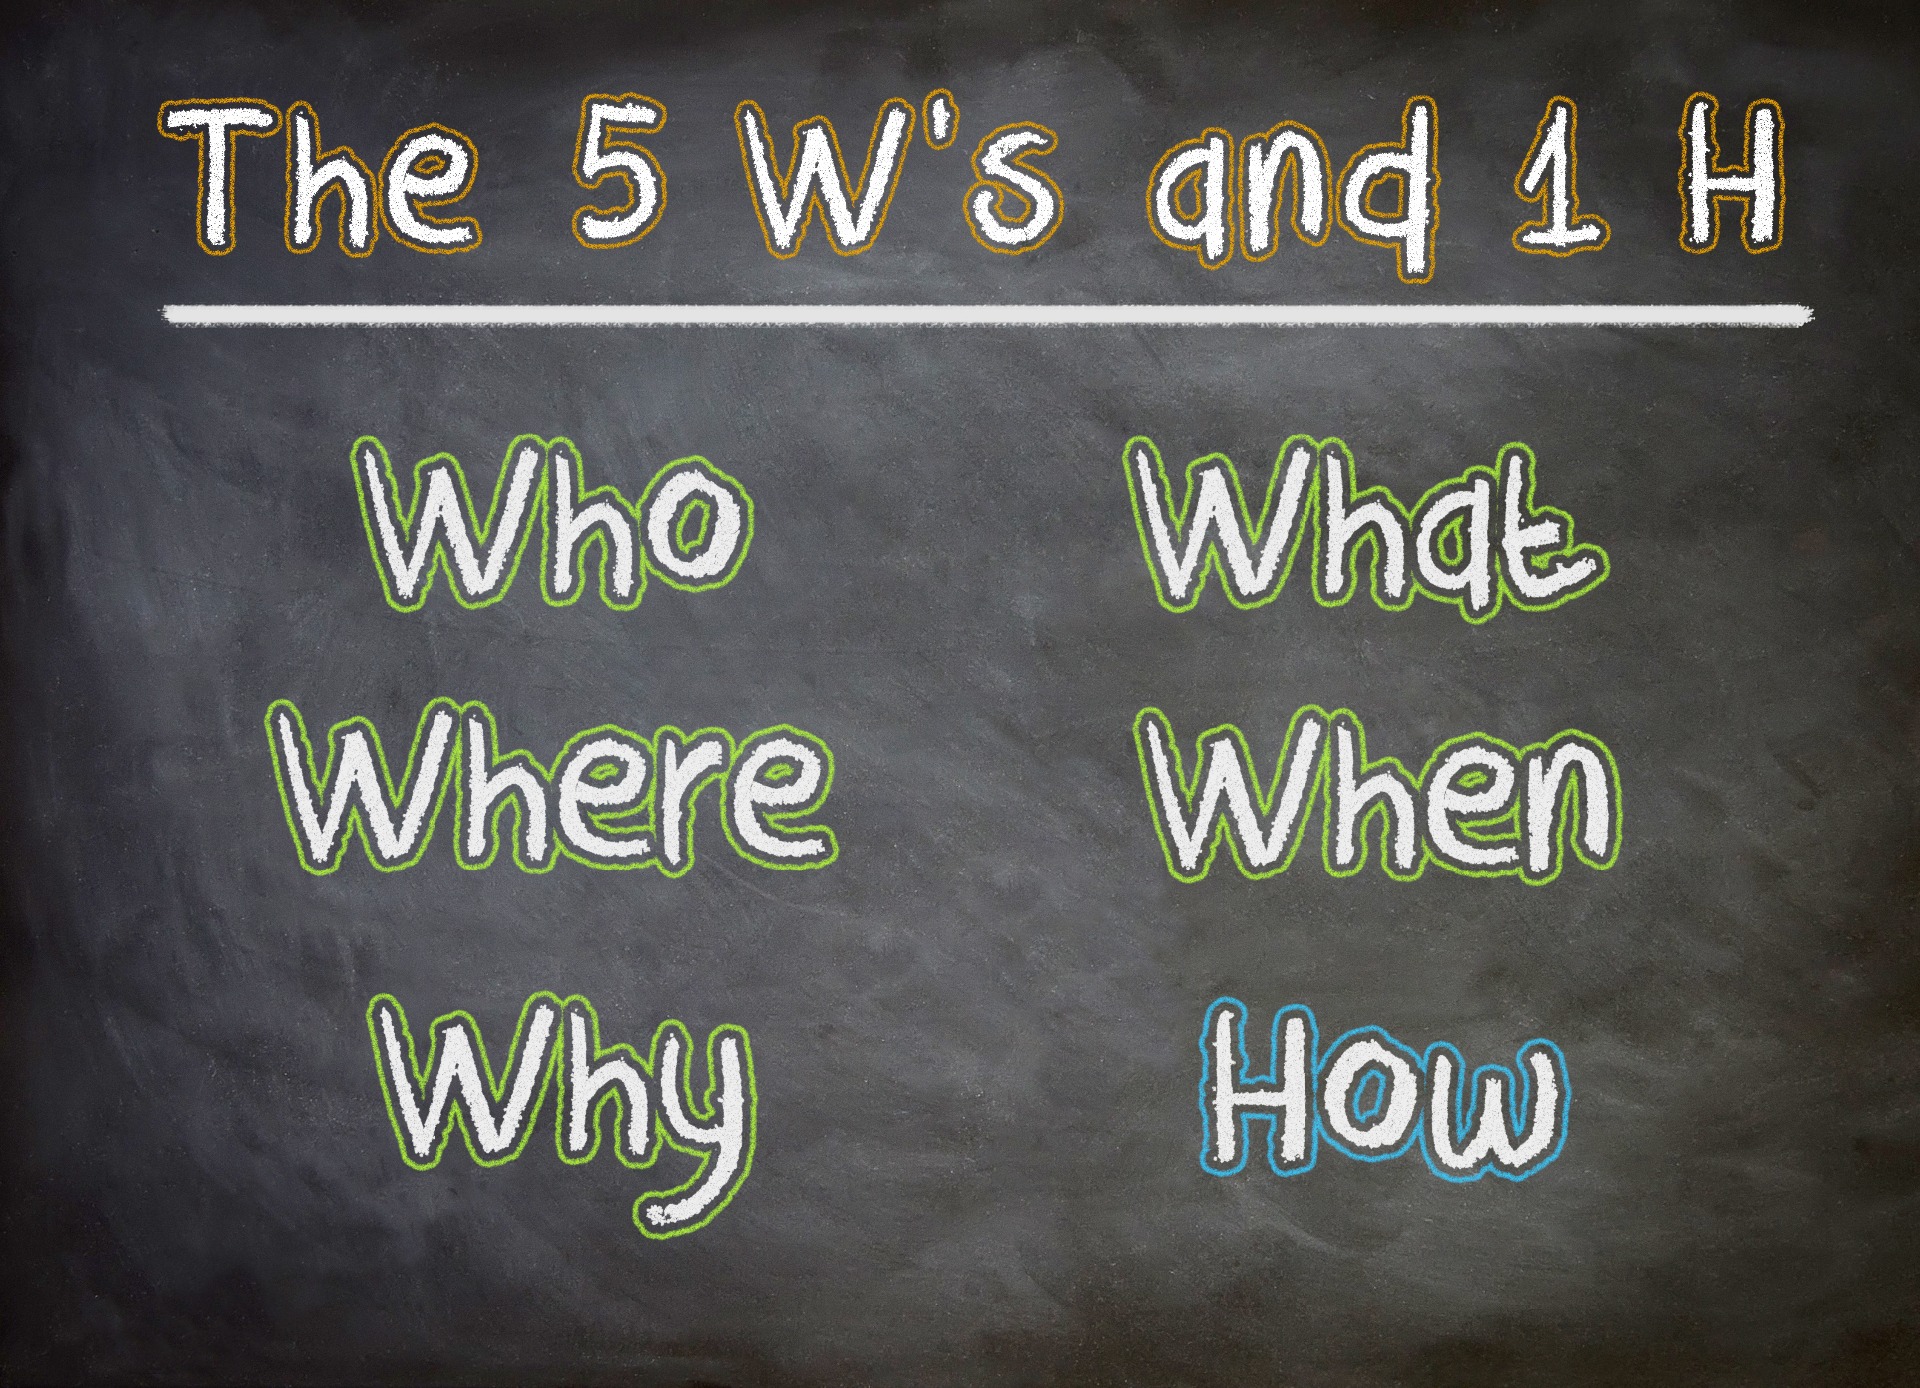 "The 5 W's and 1 H: Why, What, Where, When, Why, How" written on a chalk board in cartoon-style font; our Lasting Power of Attorney Solicitors in Lancaster discuss the 5 W's and 1 H of your Lasting Power of Attorney matters, and answer some frequently asked questions about the important documents.